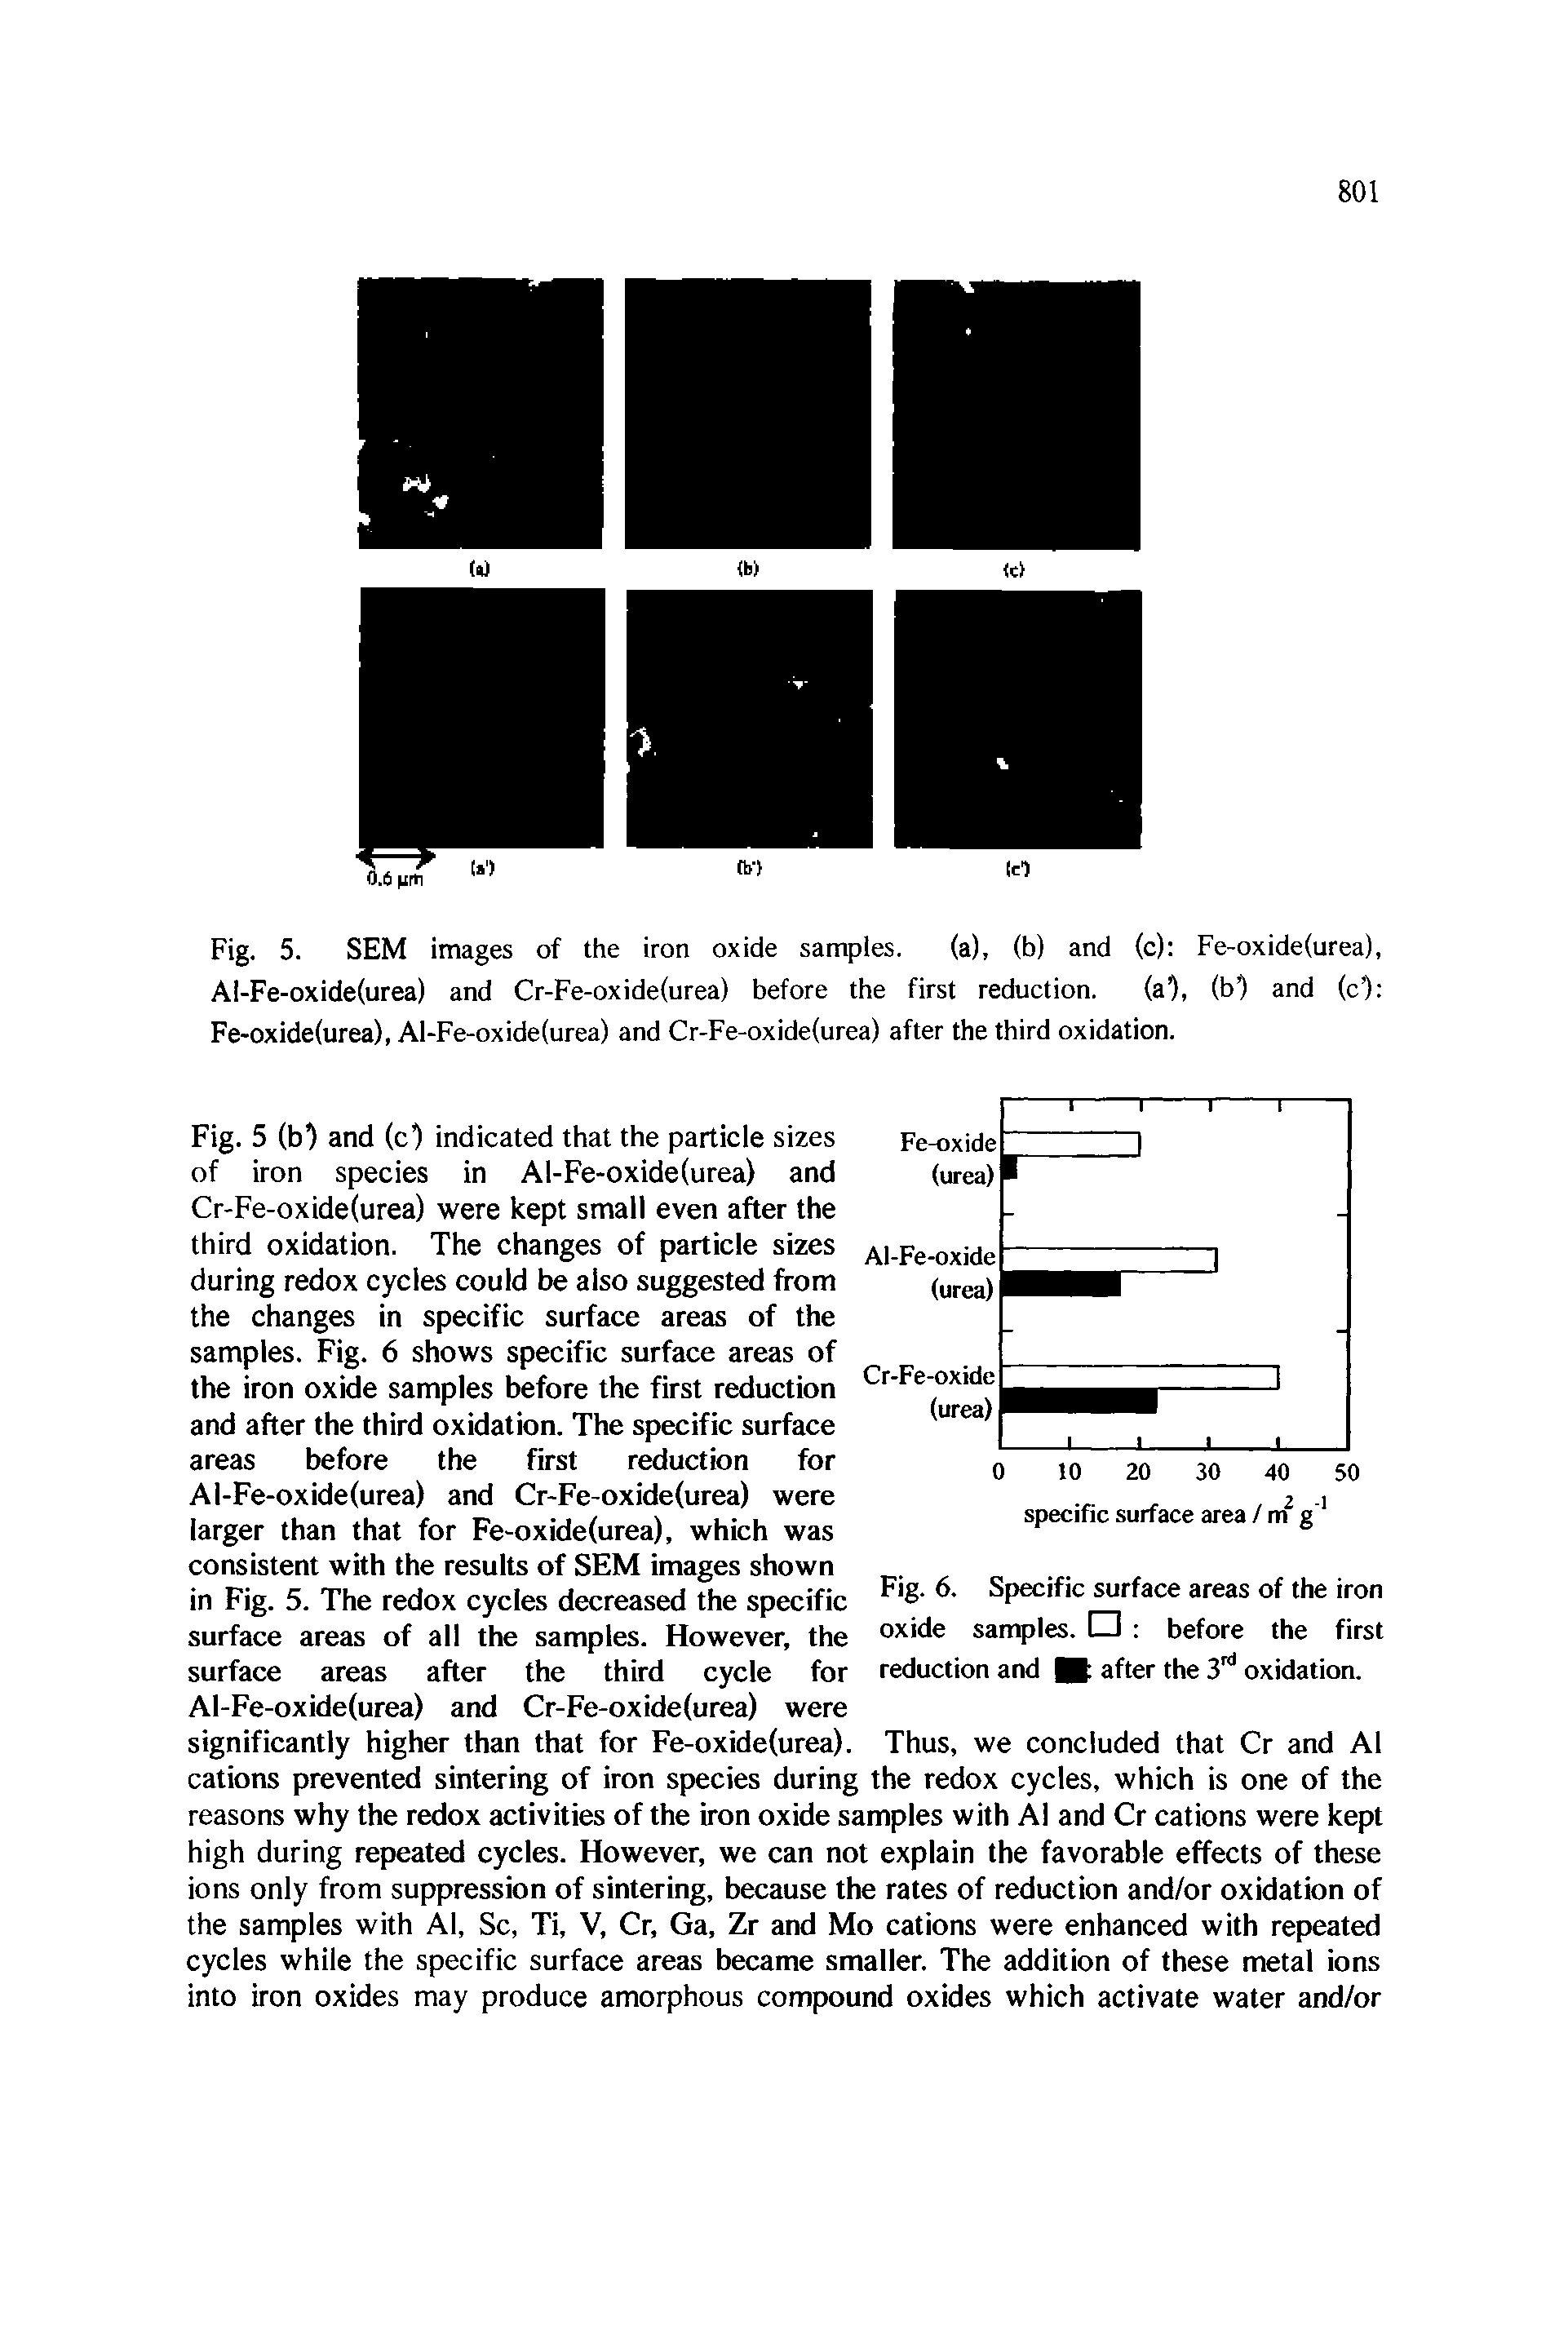 Fig. 5 (b ) and (c) indicated that the particle sizes of iron species in Al-Fe-oxide(urea) and Cr-Fe-oxide(urea) were kept small even after the third oxidation. The changes of particle sizes during redox cycles could be also suggested from the changes in specific surface areas of the samples. Fig. 6 shows specific surface areas of the iron oxide samples before the first reduction and after the third oxidation. The specific surface areas before the first reduction for Al-Fe-oxide(urea) and Cr-Fe-oxide(urea) were larger than that for Fe-oxide(urea), which was consistent with the results of SEM images shown in Fig. 5. The redox cycles decreased the specific surface areas of all the samples. However, the surface areas after the third cycle for AI-Fe-oxide(urea) and Cr-Fe-oxide(urea) were...